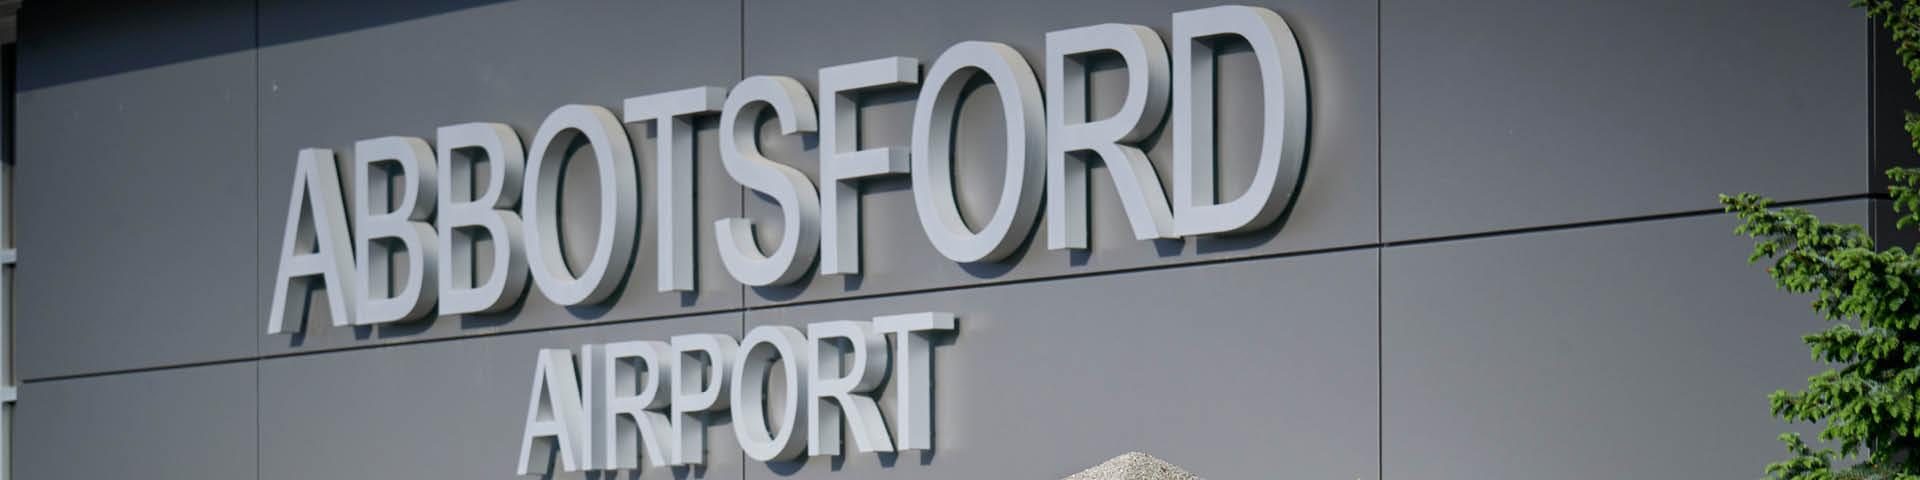 Image of Abbotsford Airport Sign